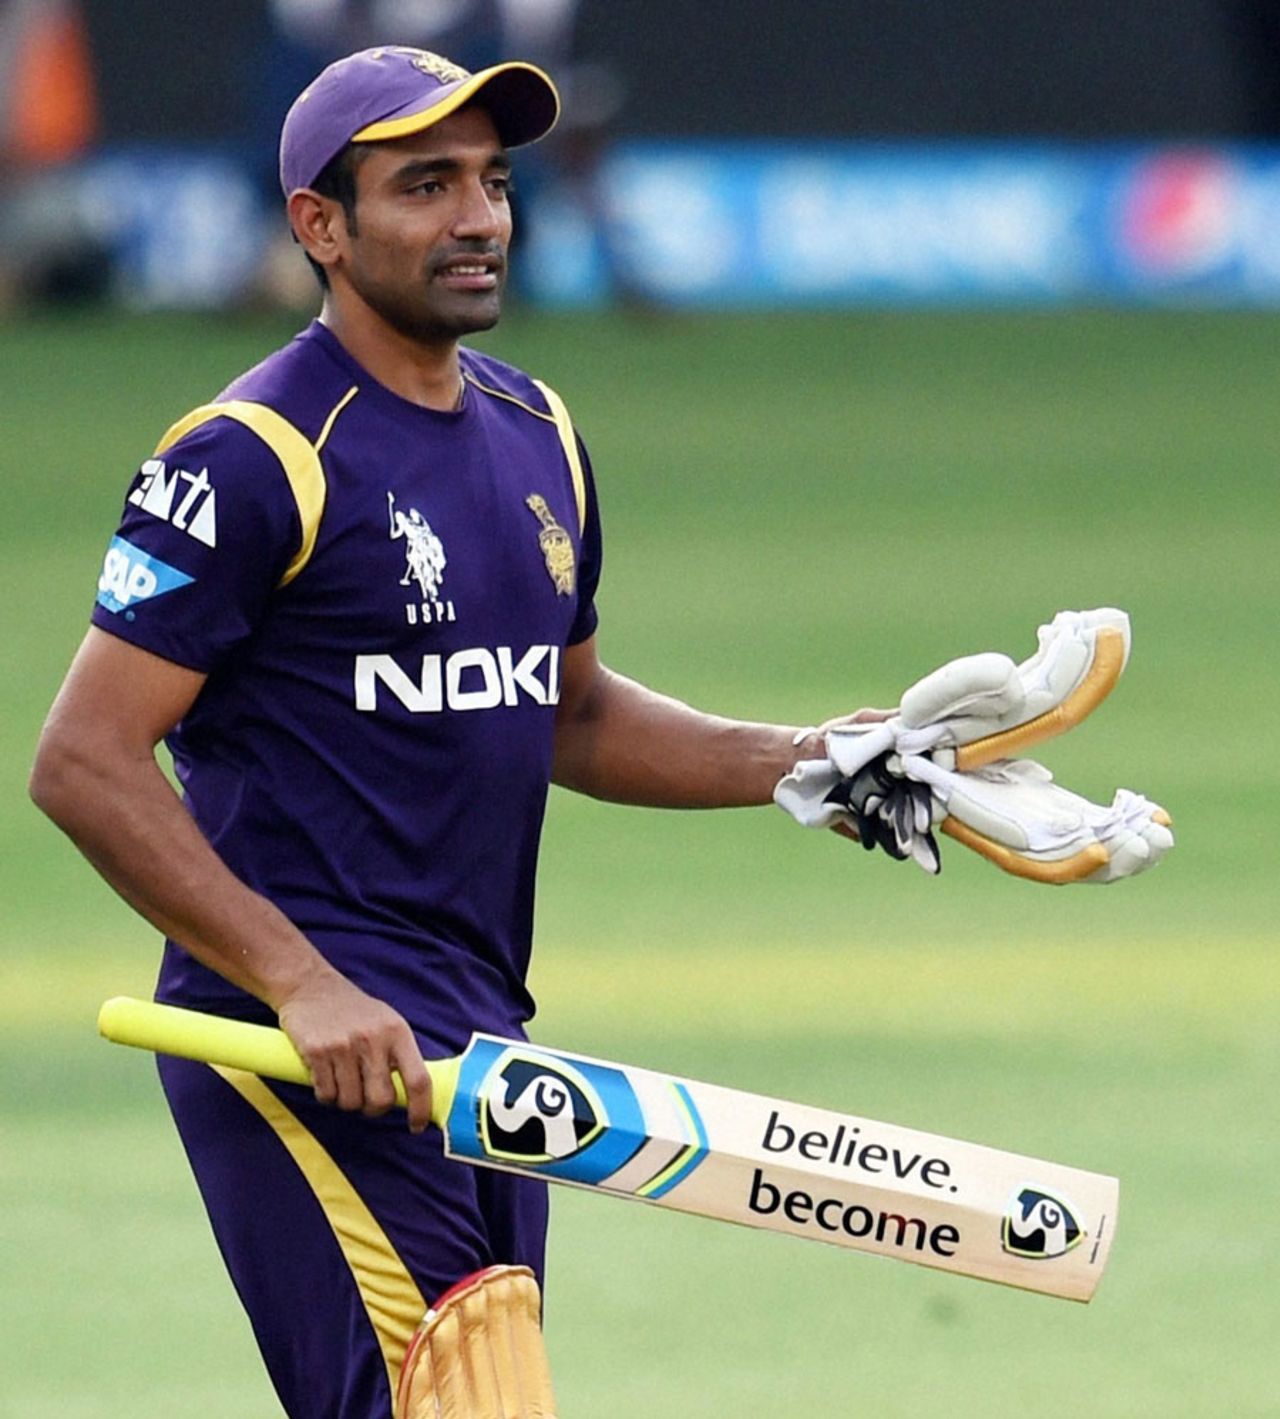 Robin Uthappa at a practice session on the eve of the IPL final, IPL 2014, Bangalore, May 31, 2014